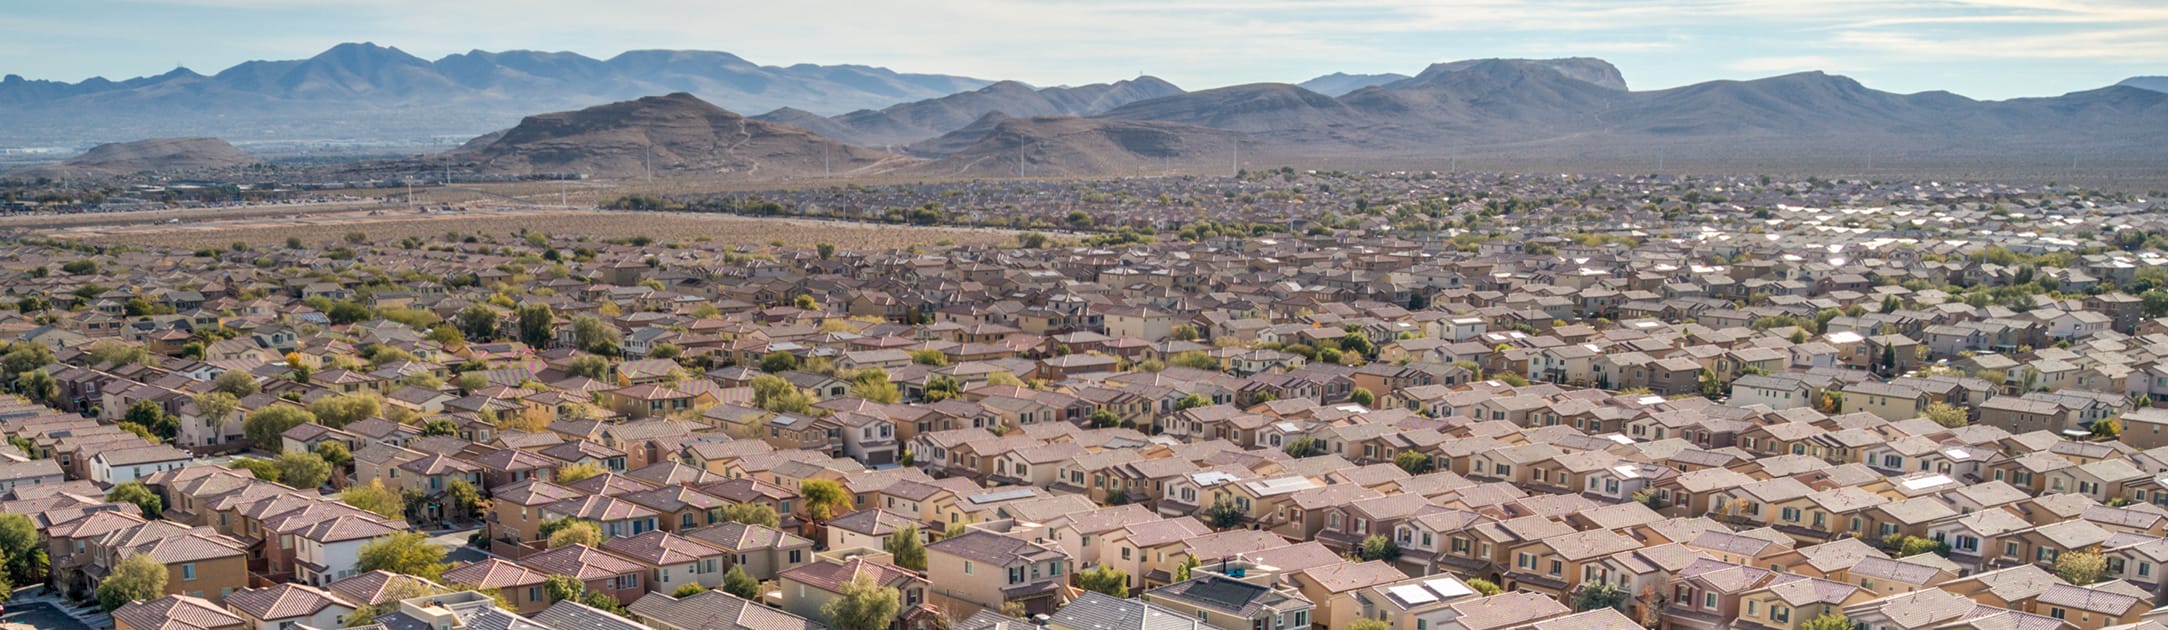 Aerial view of neighborhood with mountains in the background.